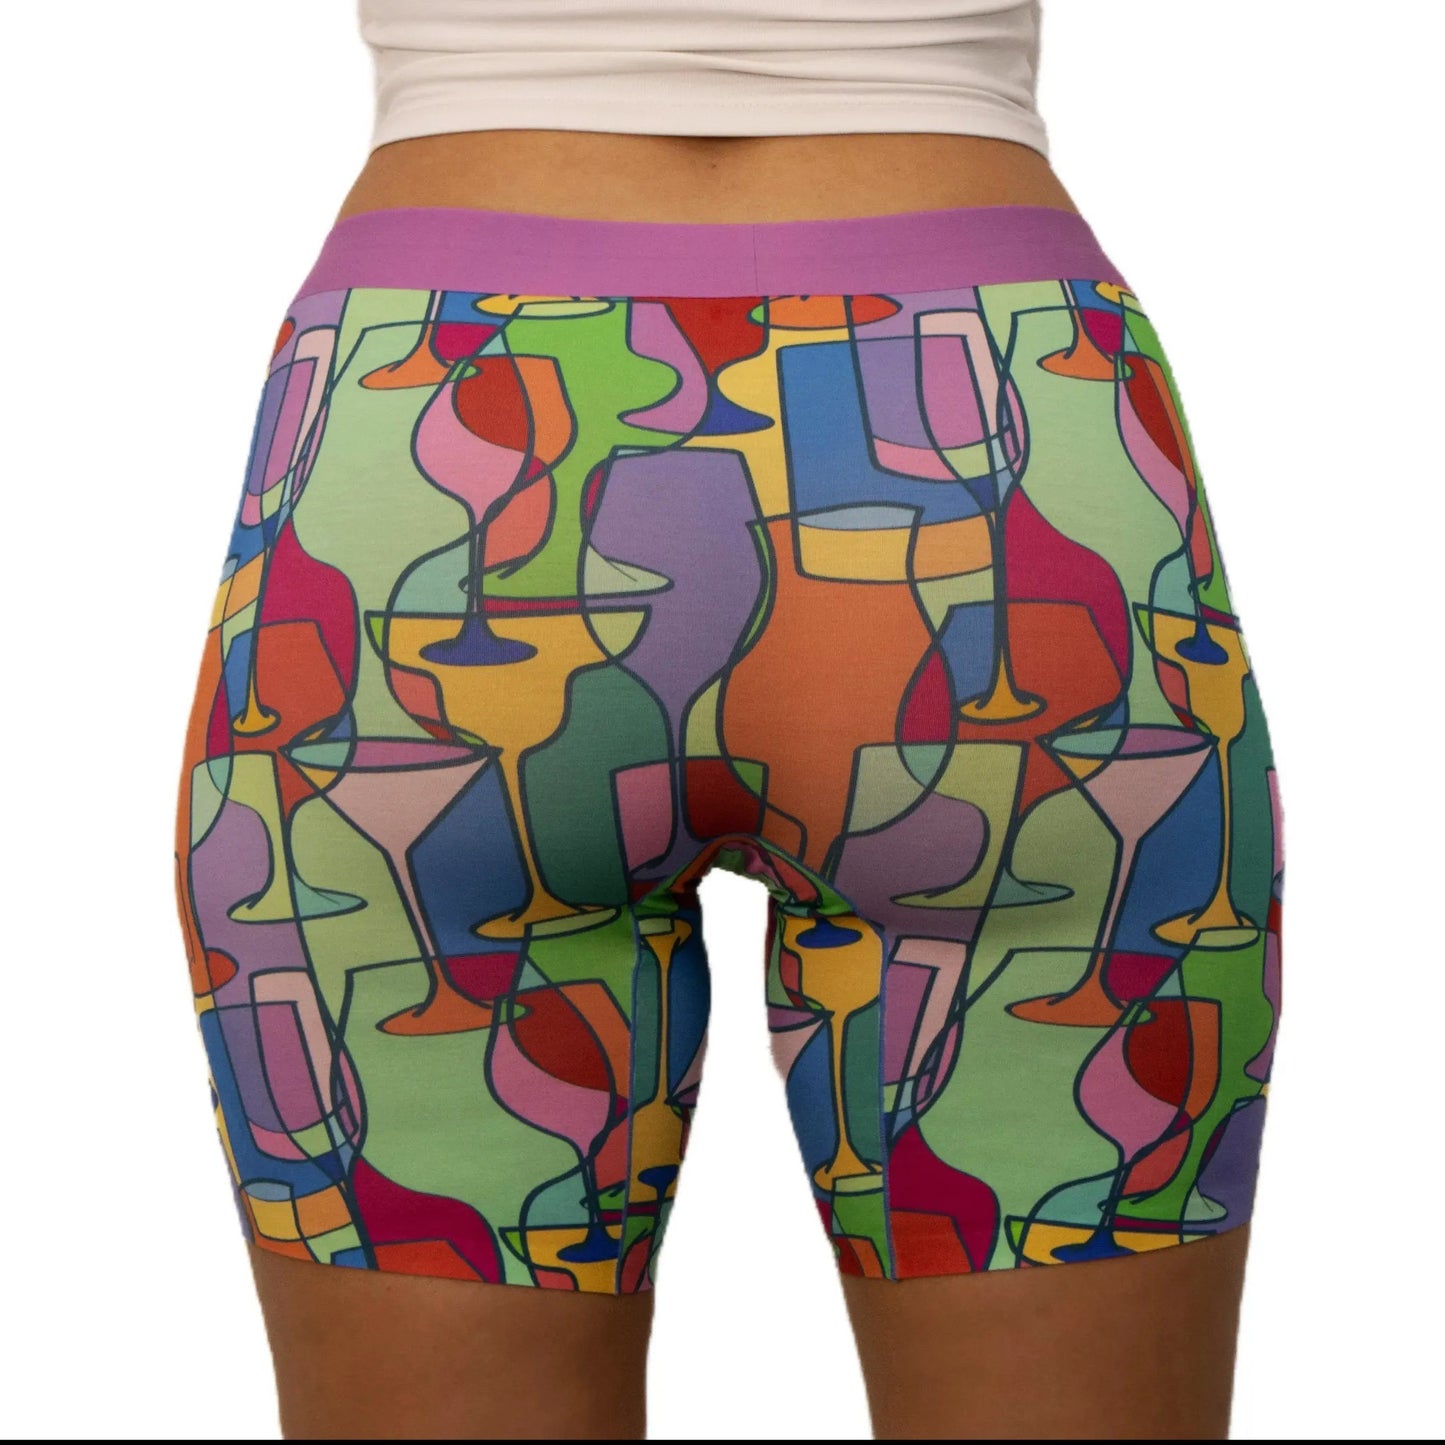 puresnug ladies' boxer briefs back view in wine party print